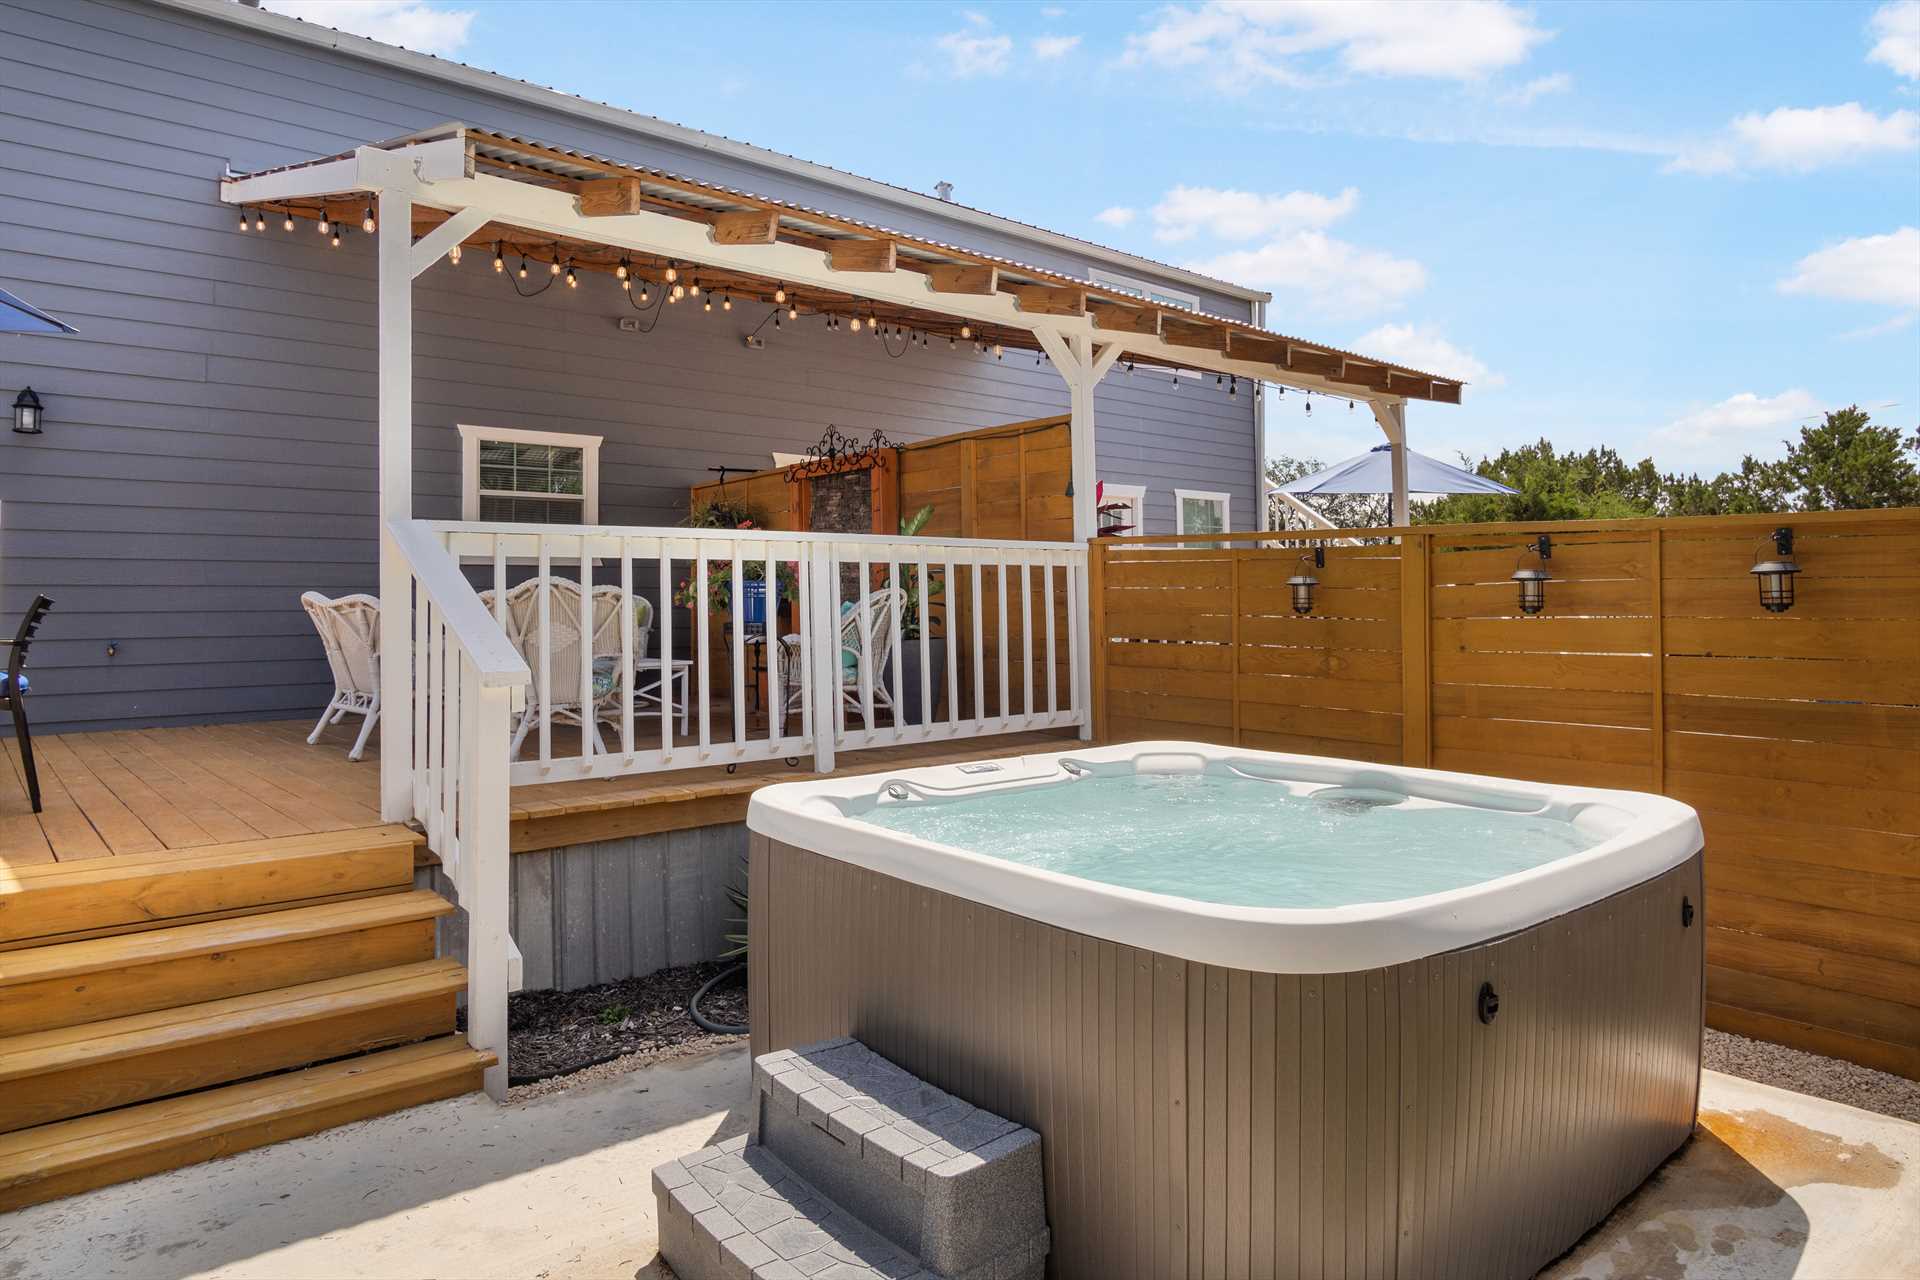                                                 Bubble away your troubles day or night in the therapeutic warmth of the four-person hot tub!